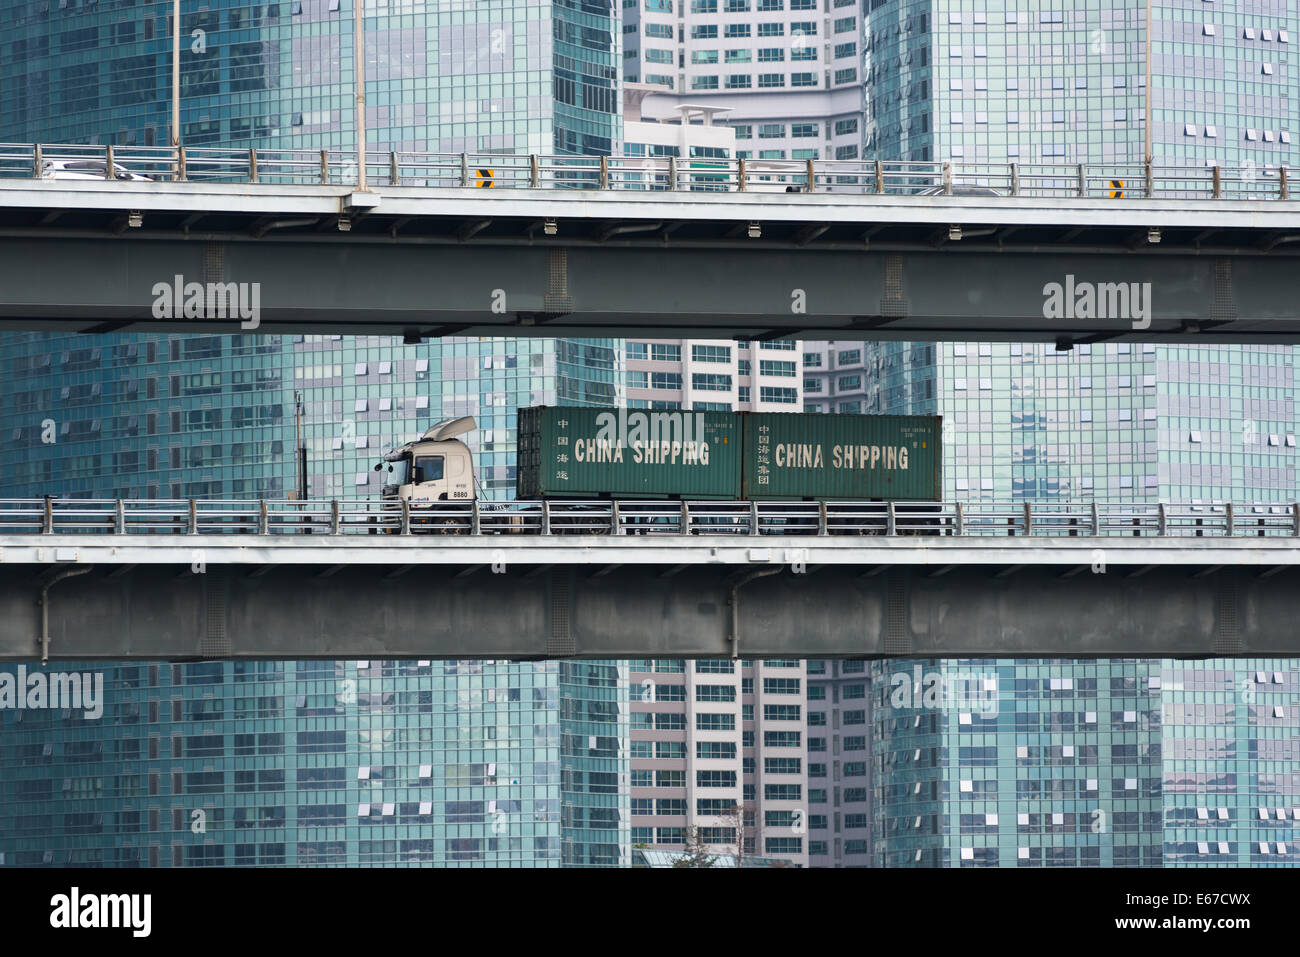 A Chinese lorry goes past the modern glass skyscrapers of Centum City, Pusan, South Korea. Stock Photo